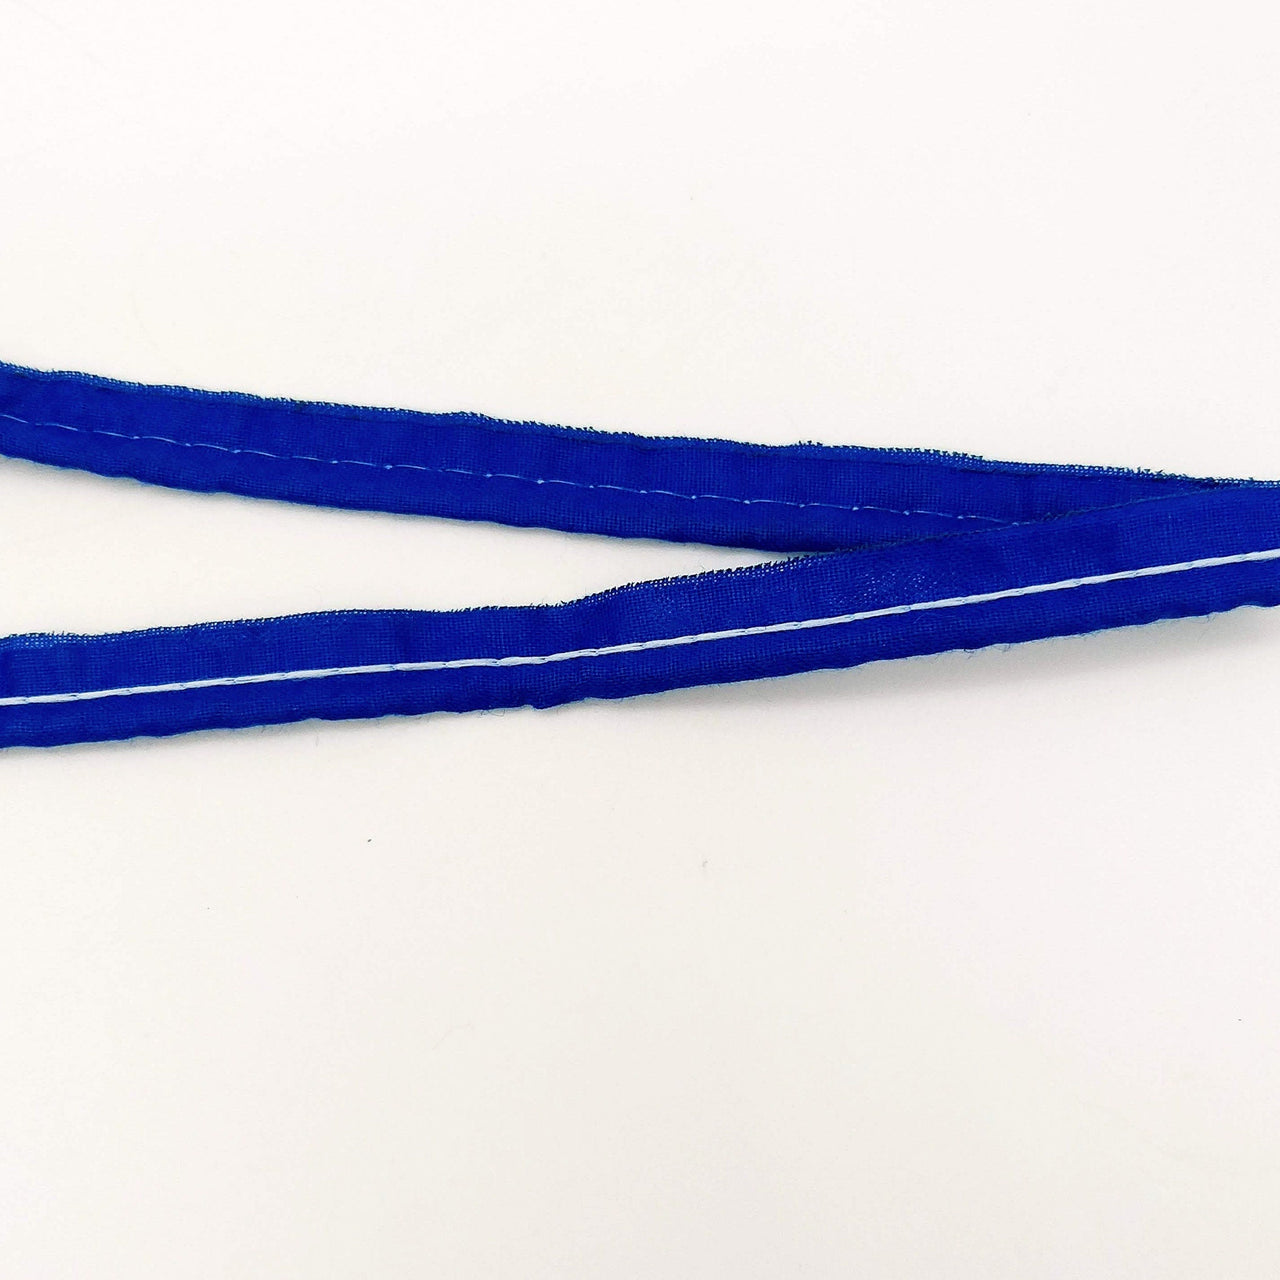 3 Yards, 5mm Flanged Insertion Piping on 10mm Band, Royal Blue Fabric Trim